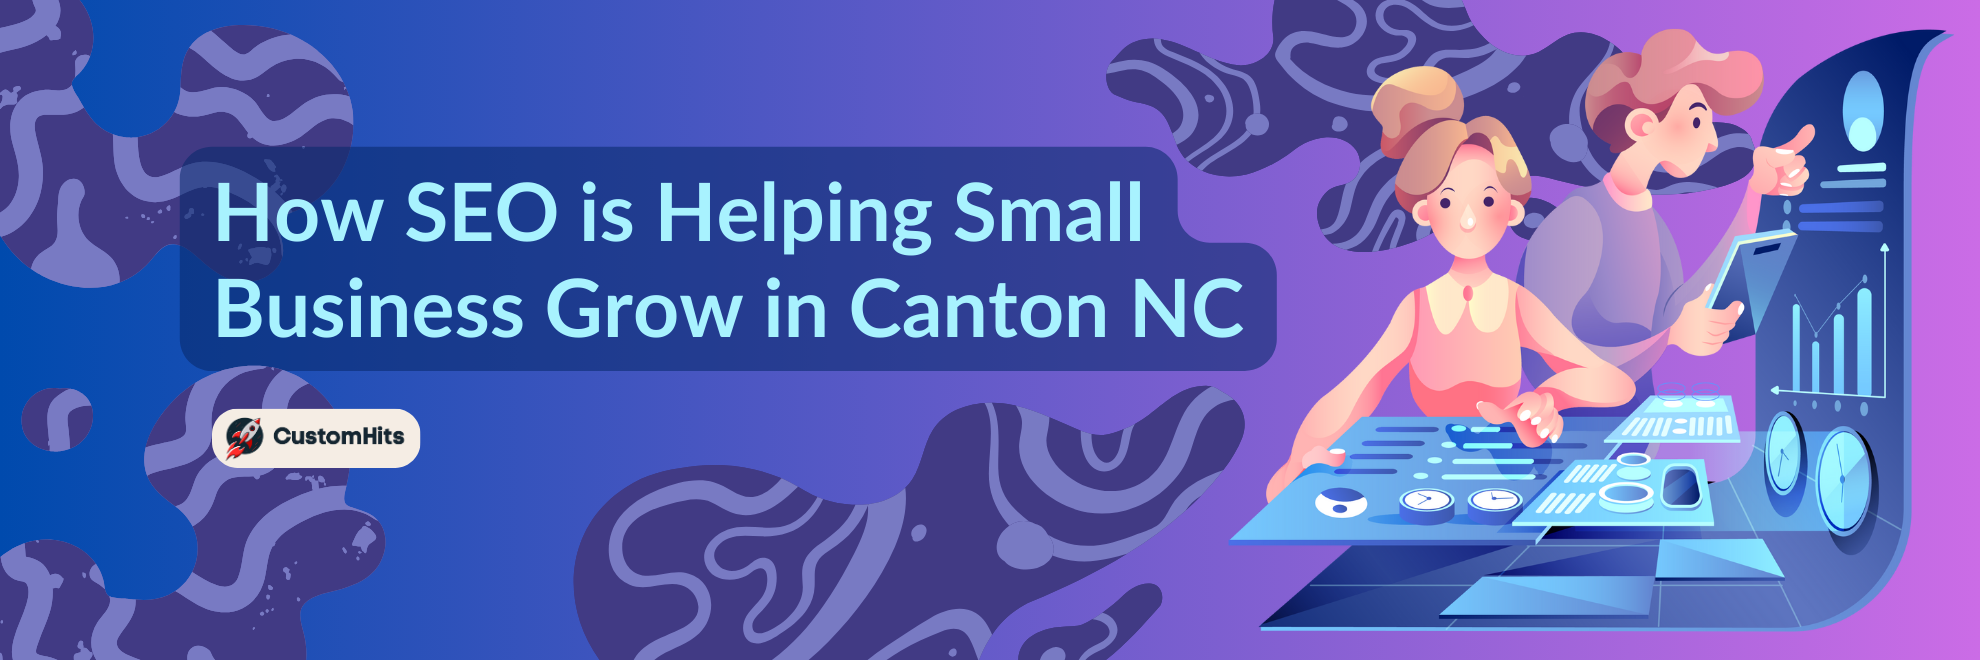 How SEO is Helping Small Business Grow in Canton NC